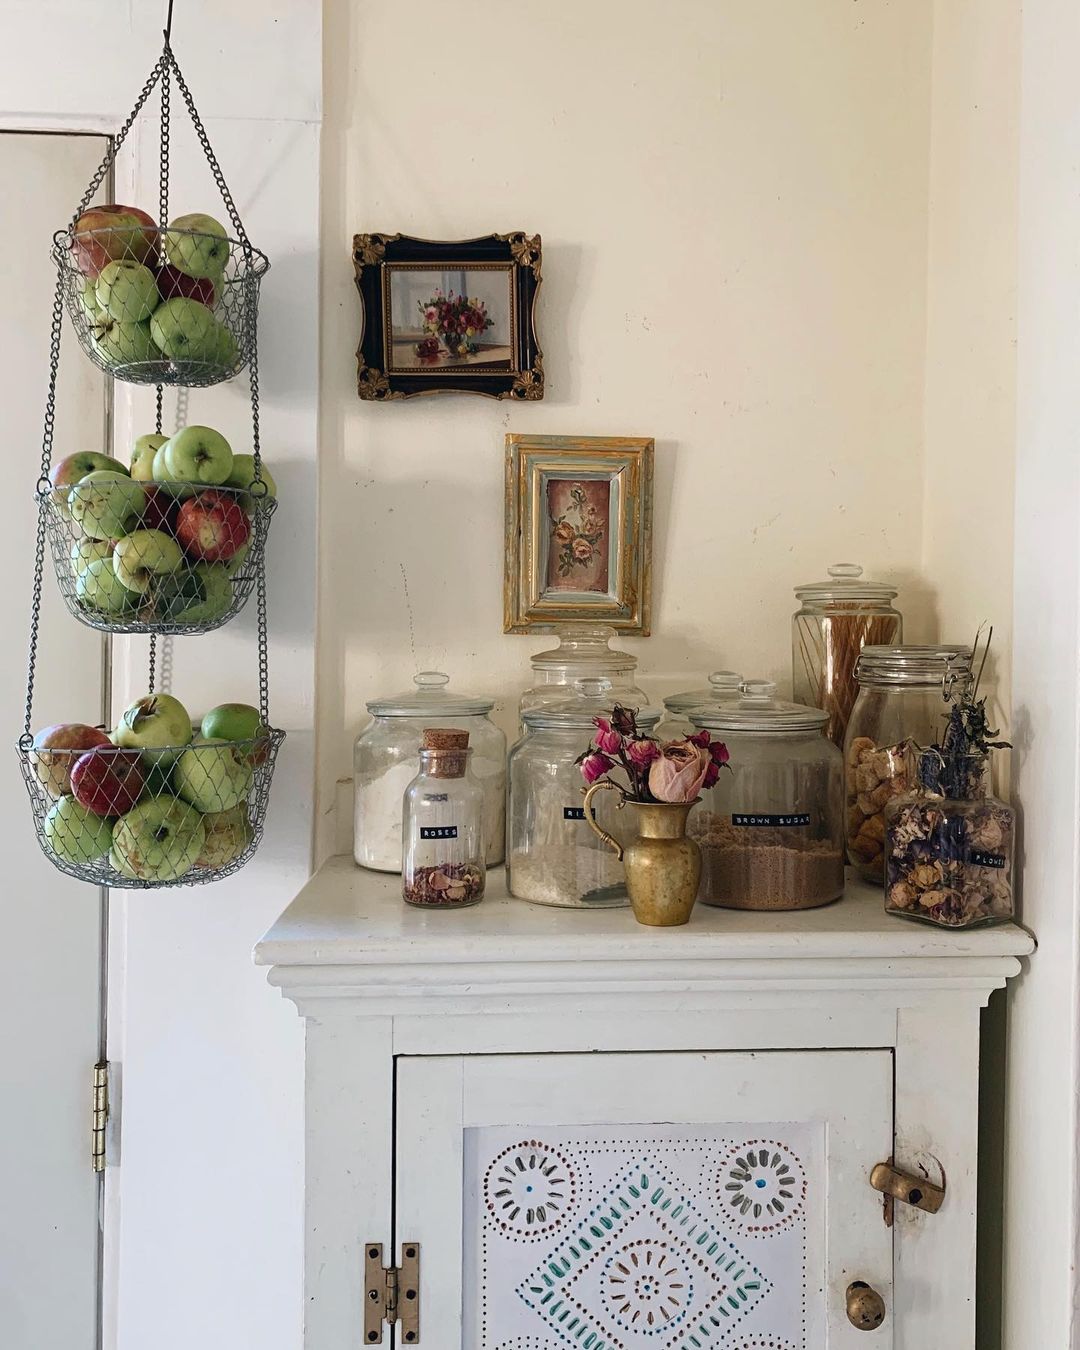 Kitchen Space with Ingredient Jars Easy to See What's Inside. Photo by Instagram user @bonjourmoon